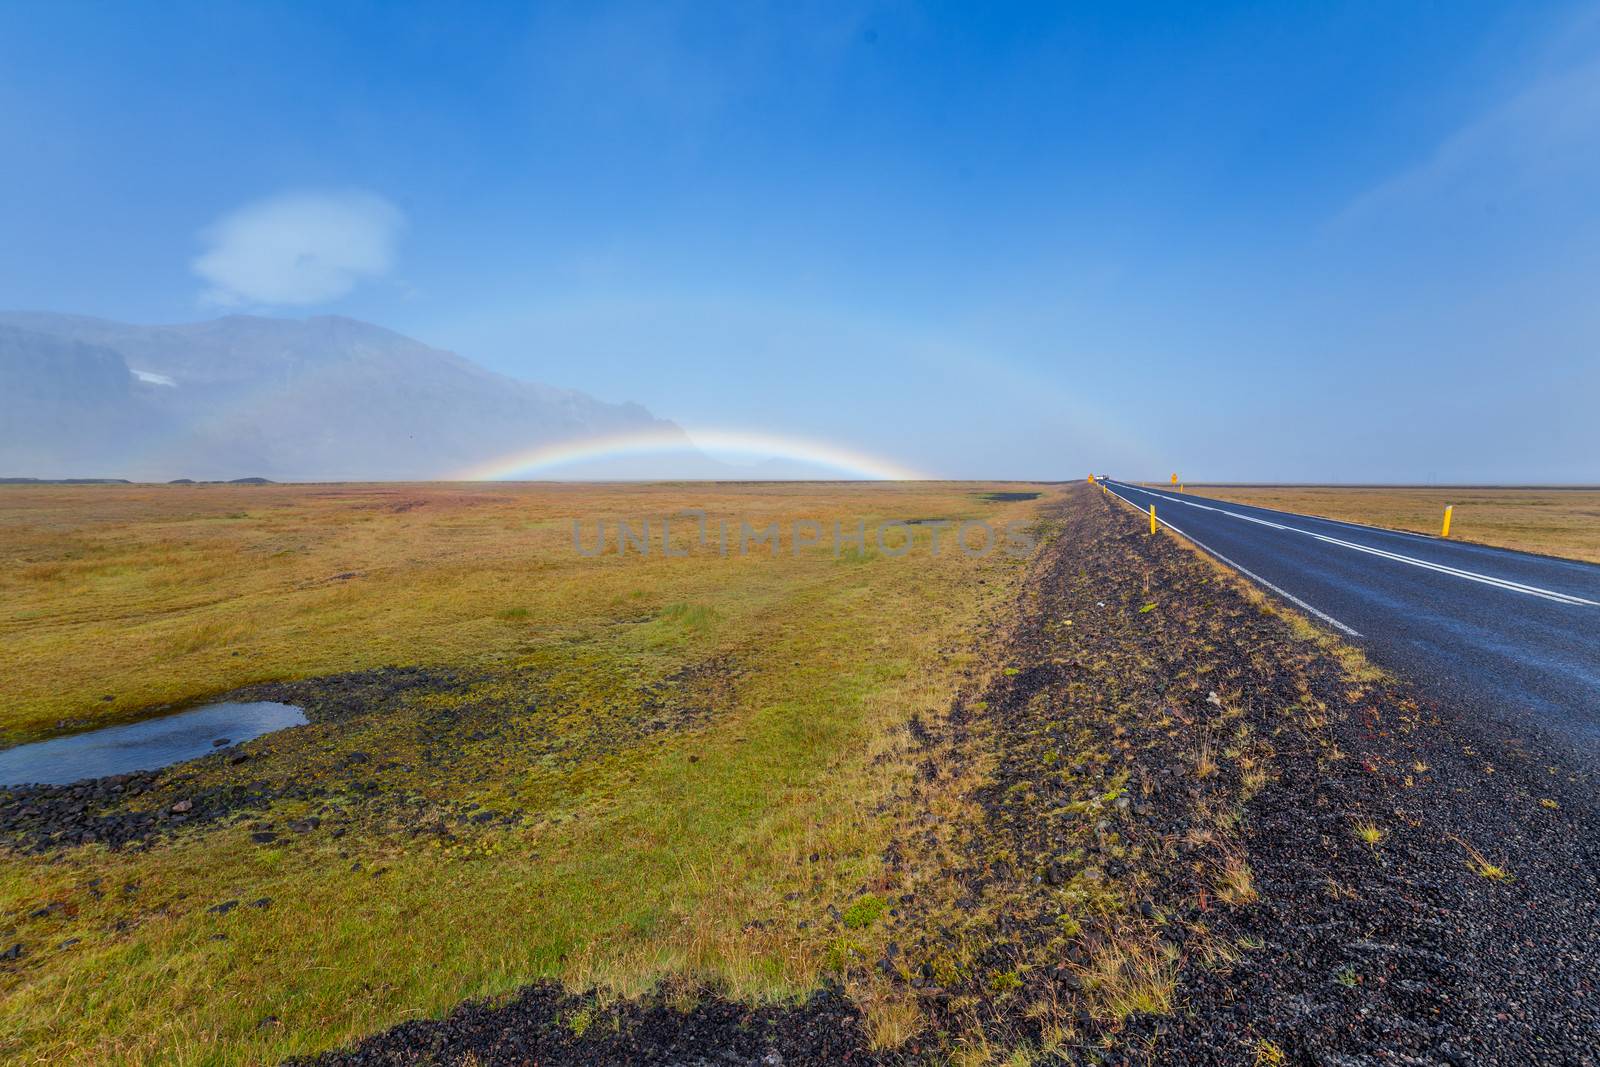 South Icelandic mountain landscape under a blue bright sky with double rainbow